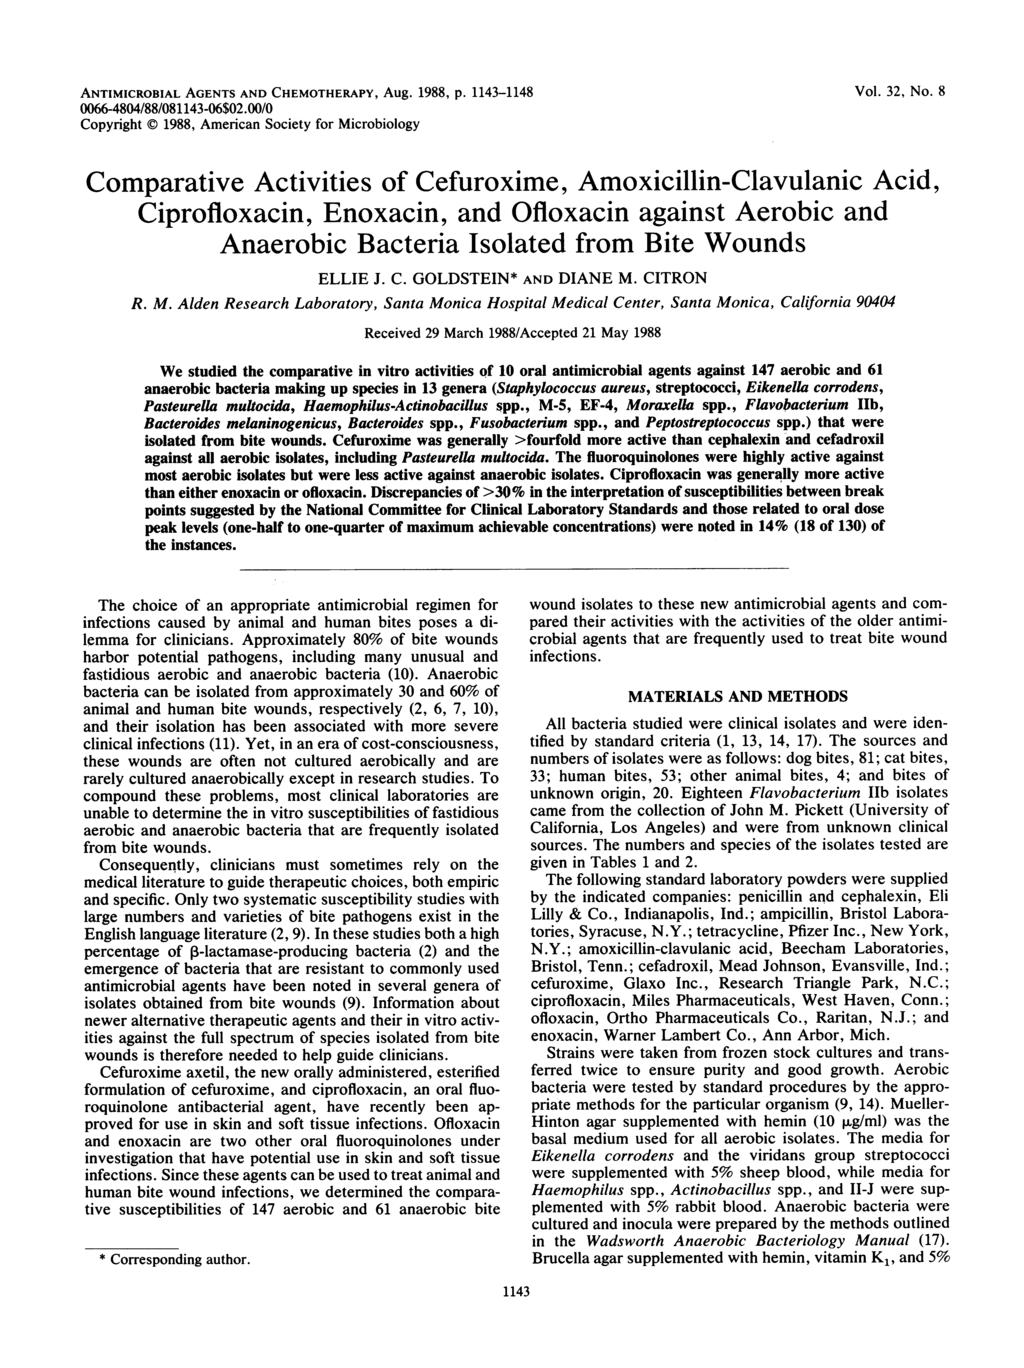 ANTIMICROBIAL AGENTS AND CHEMOTHERAPY, Aug. 1988, p. 1143-1148 Vol., No.